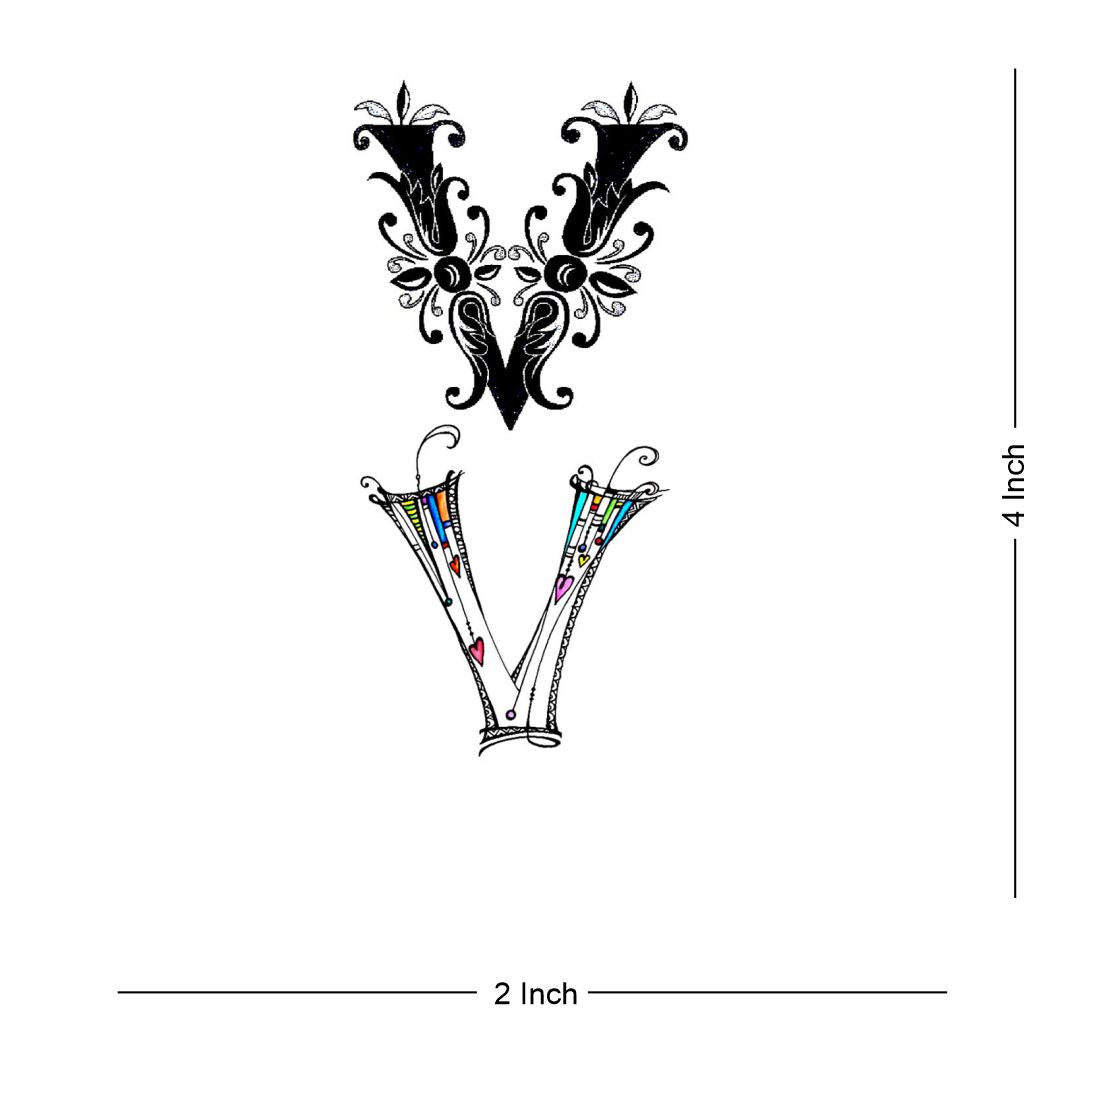 Ordershock VB Name Letter Tattoo Waterproof Boys and Girls Temporary Body  Tattoo Pack of 2. - Price in India, Buy Ordershock VB Name Letter Tattoo  Waterproof Boys and Girls Temporary Body Tattoo